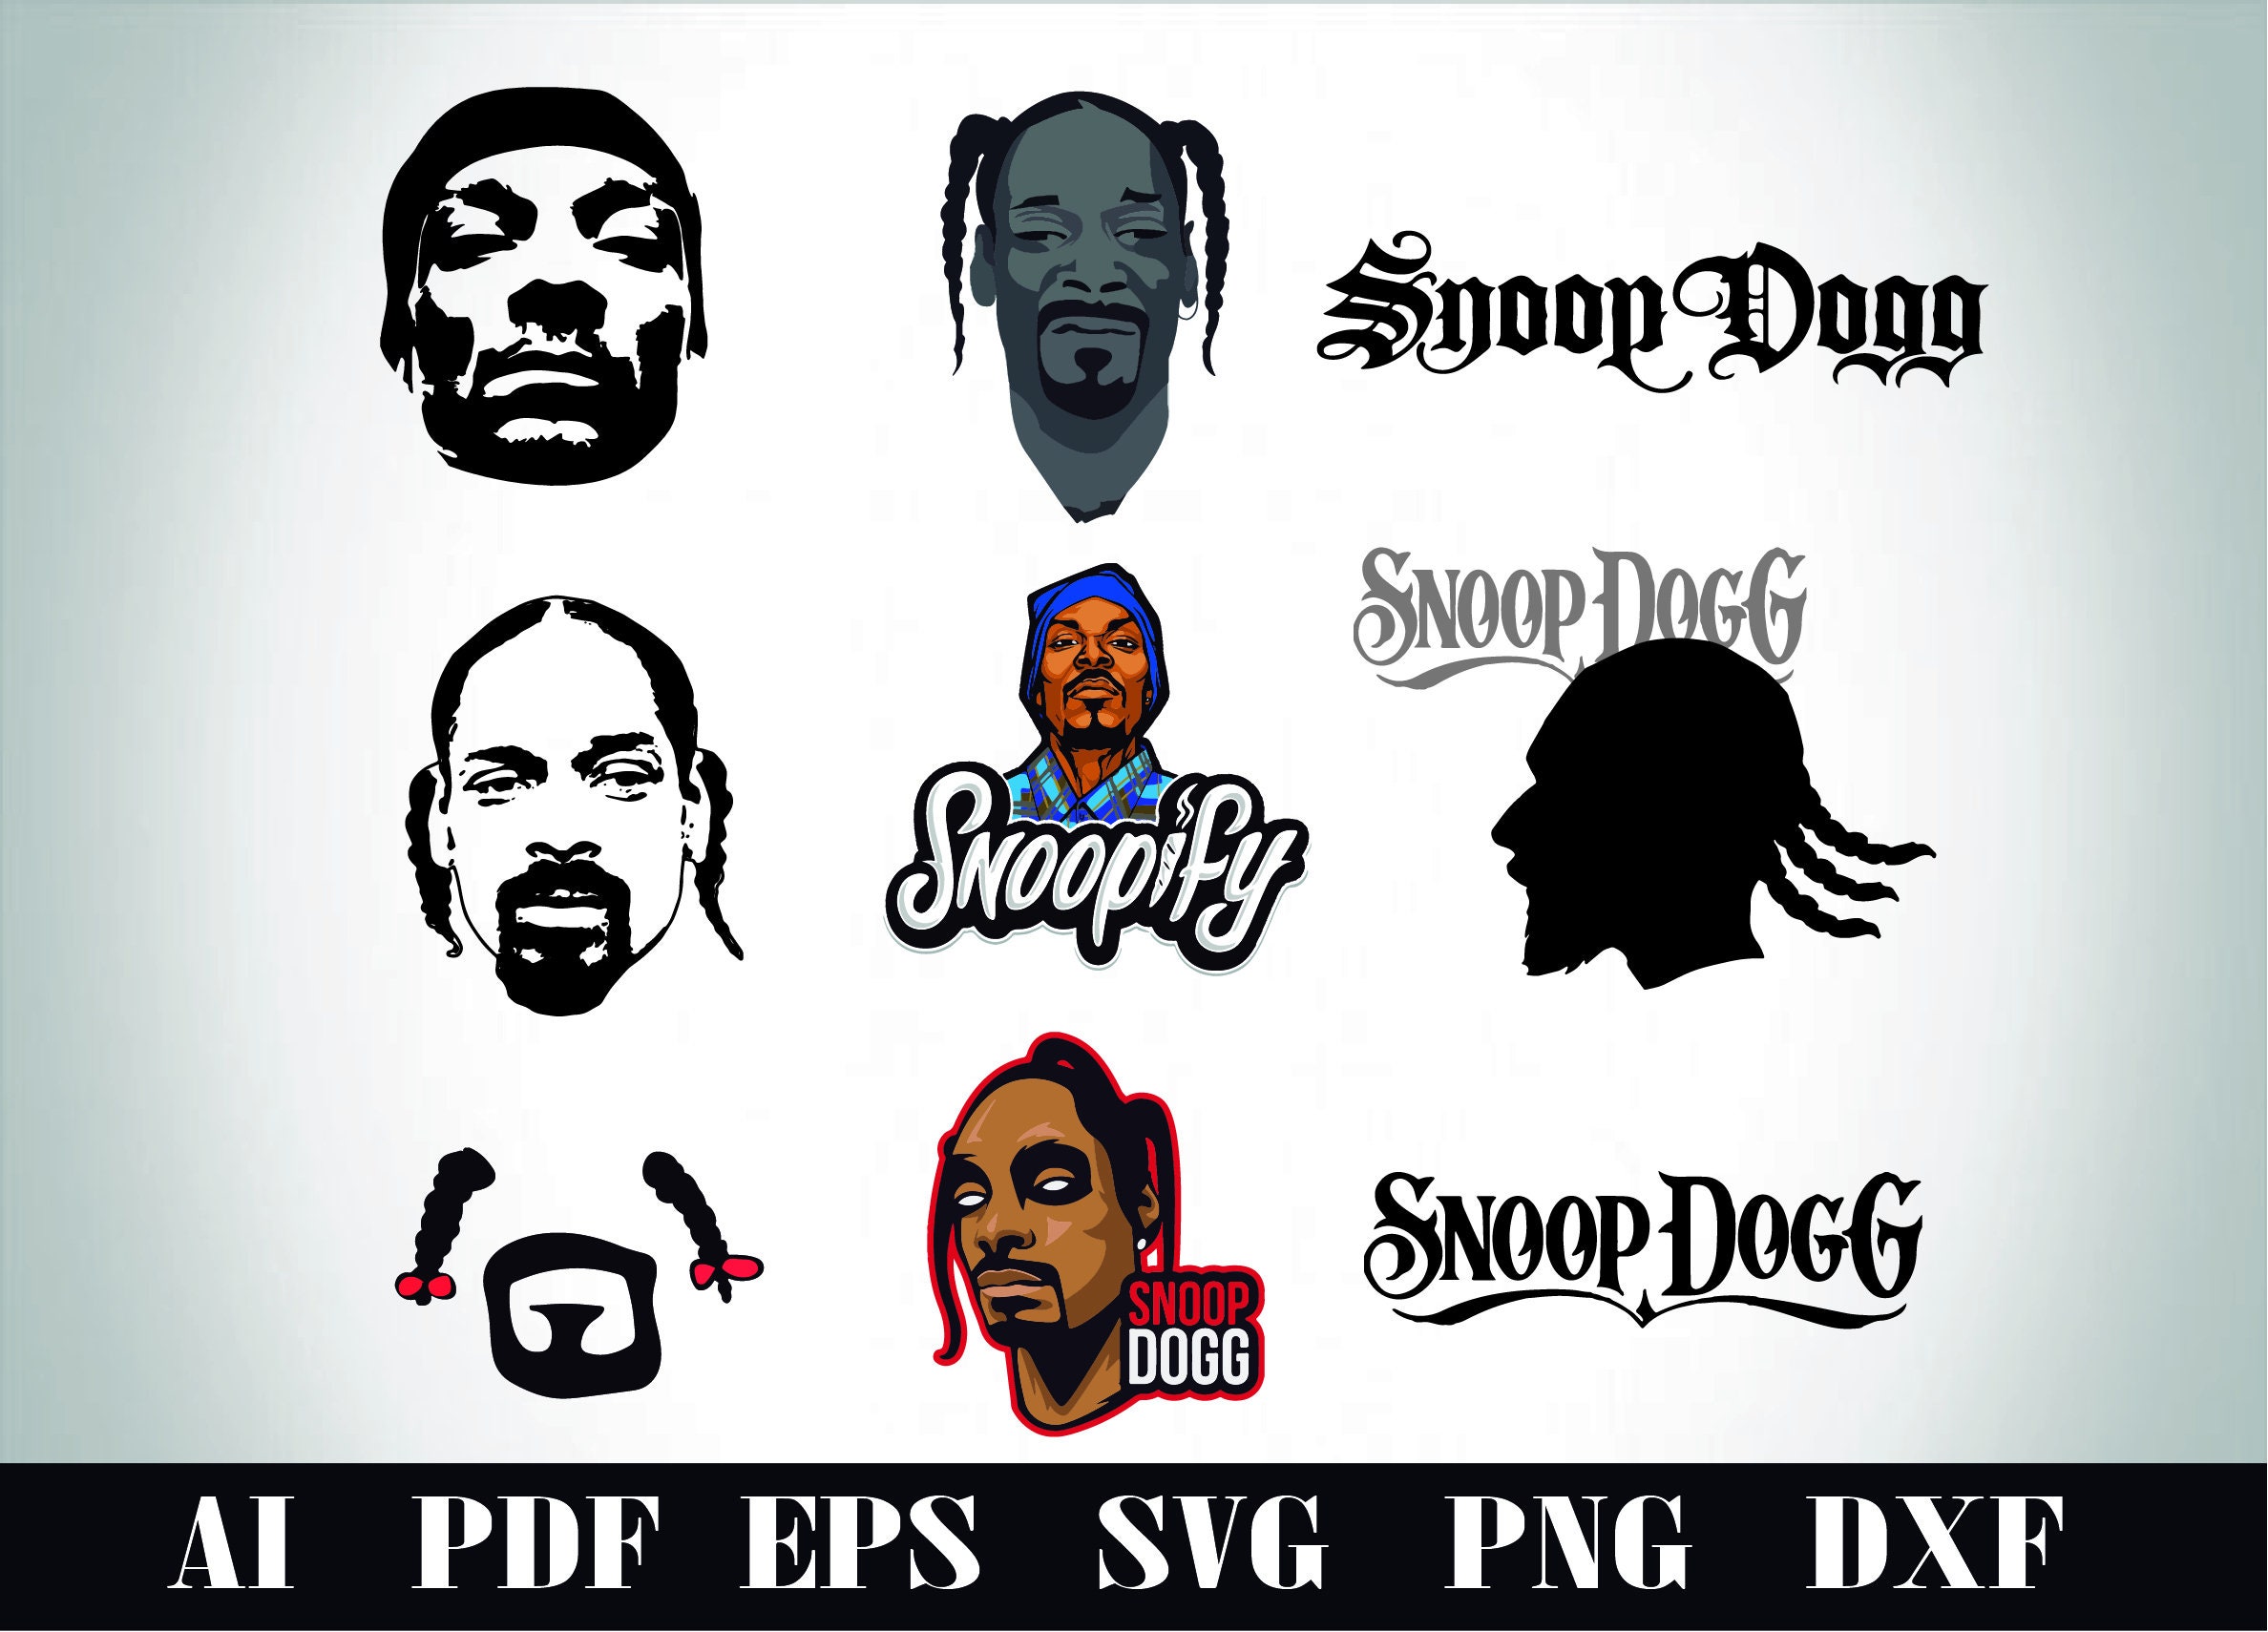 5. Snoop Dogg Nail Stickers - wide 7